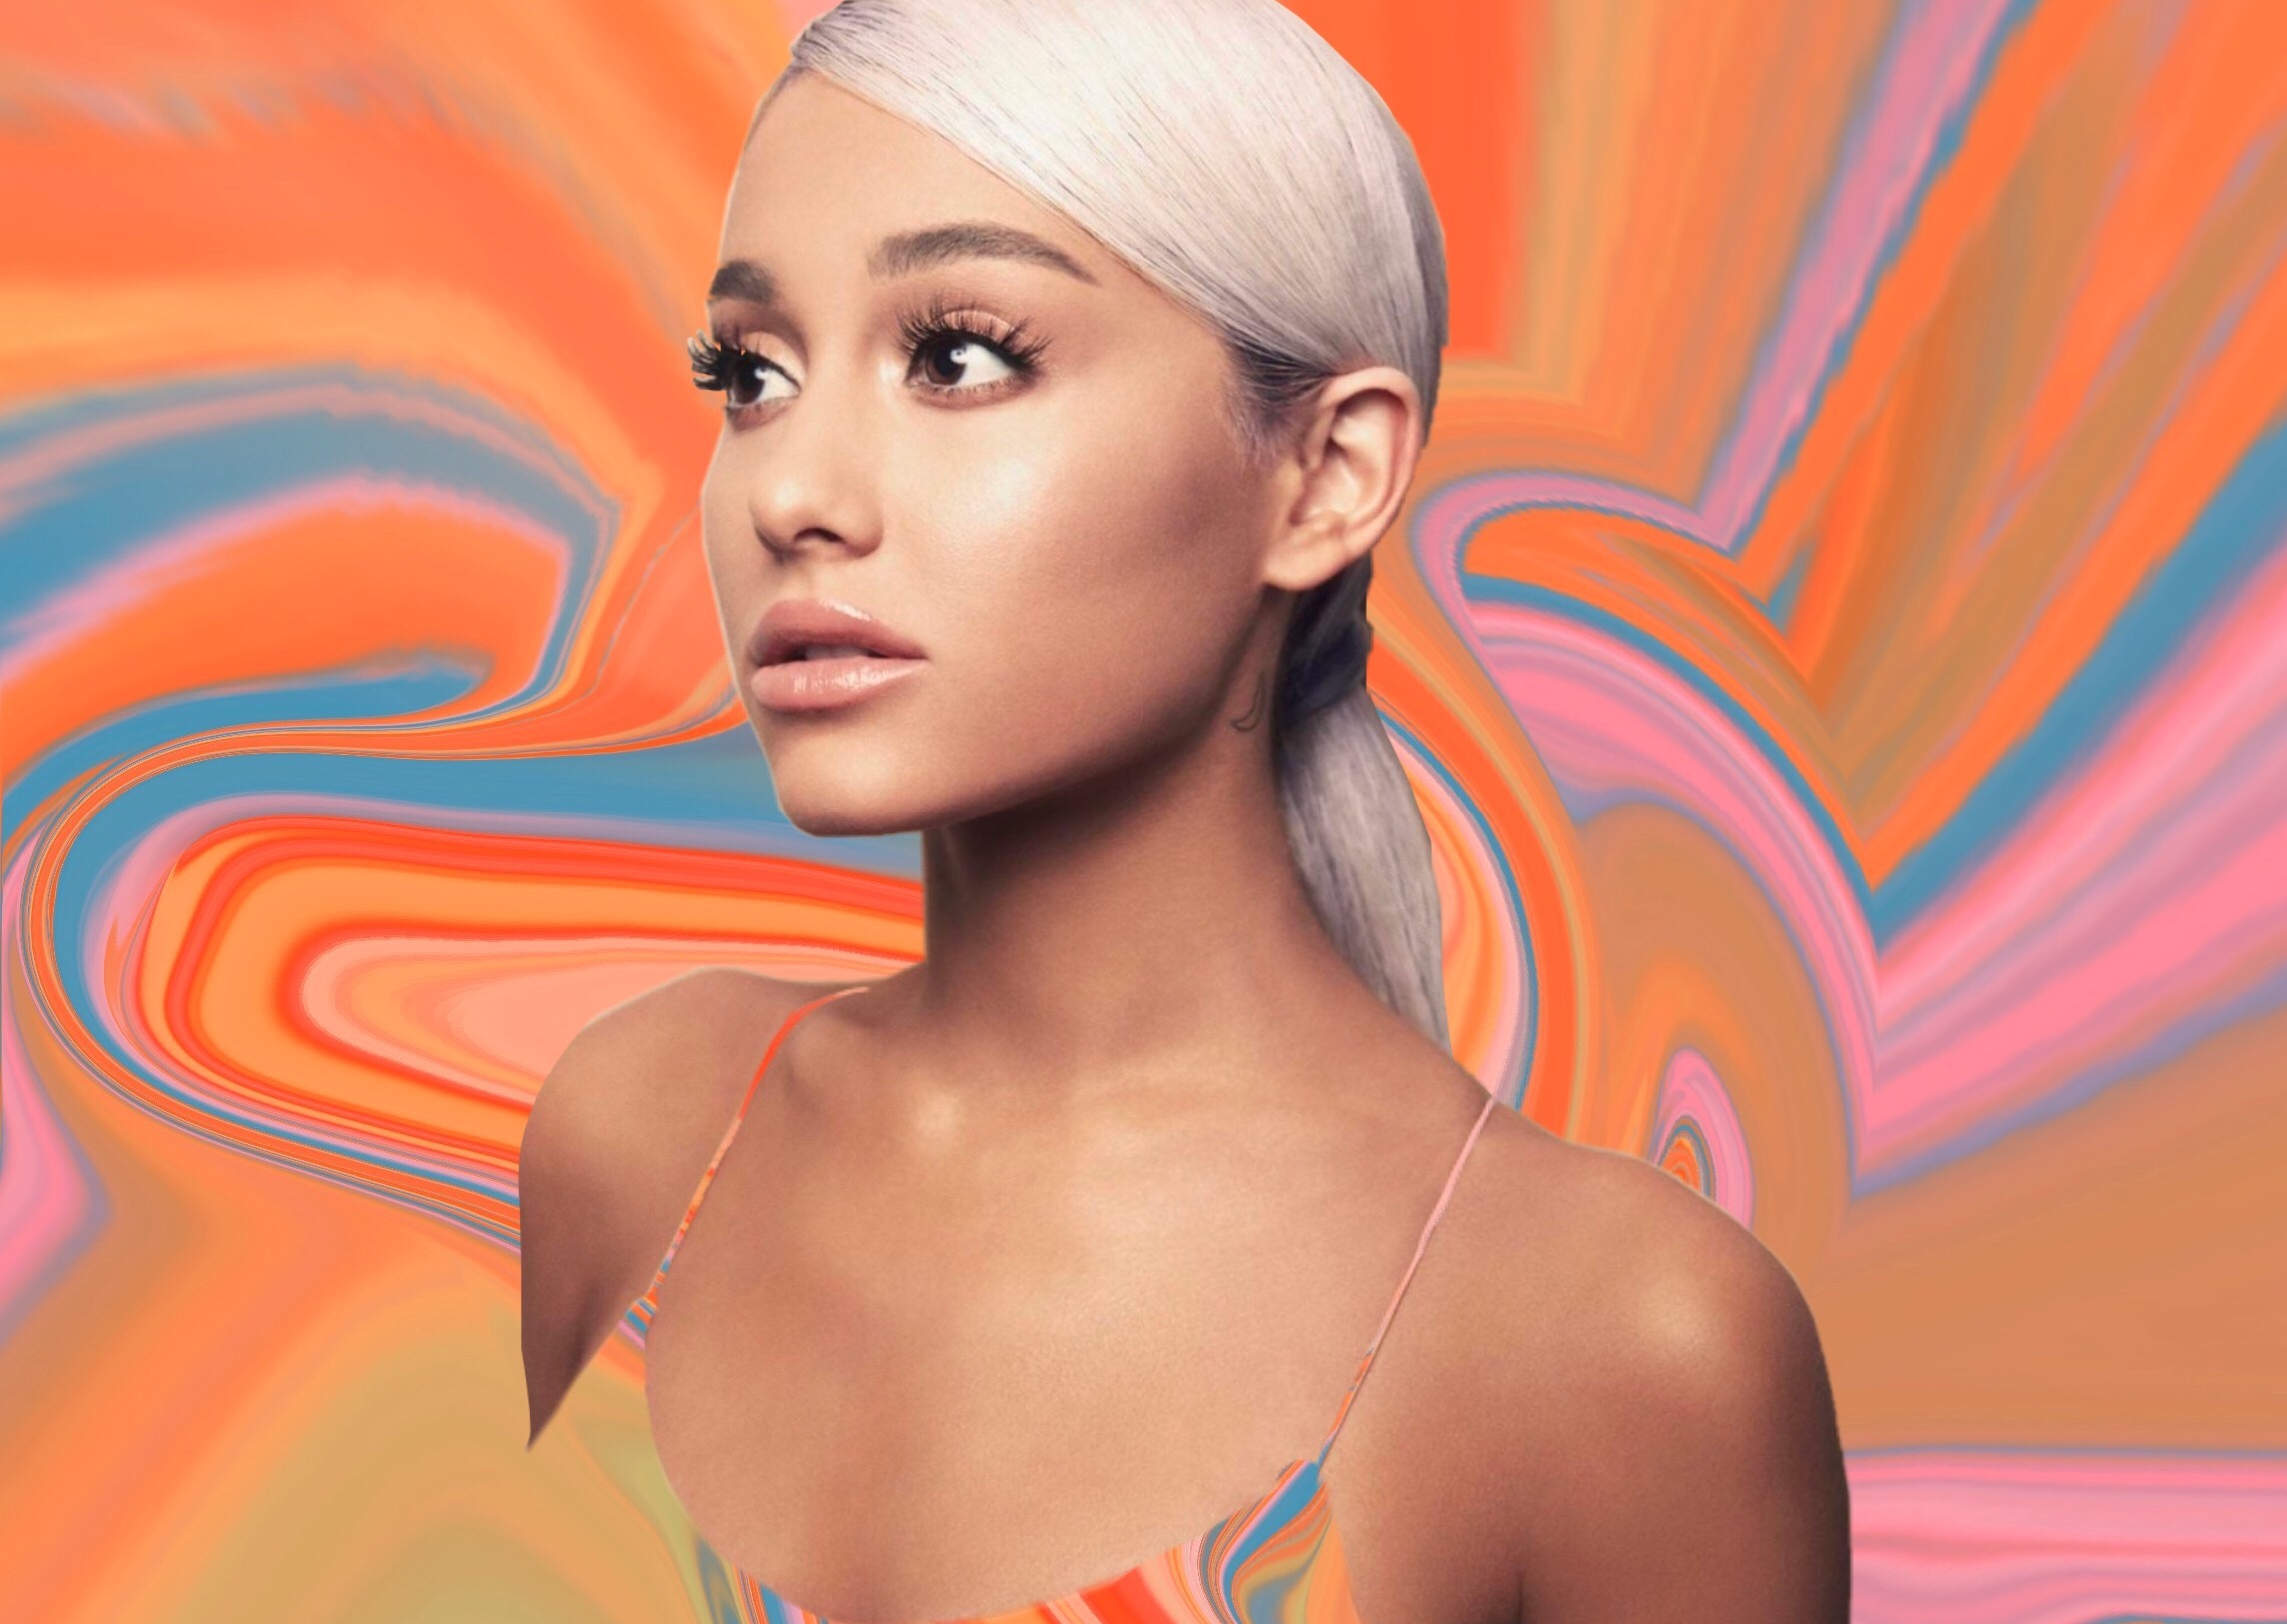 7 Ariana Grande Masterpieces To Freak Out Over While Listening To 7